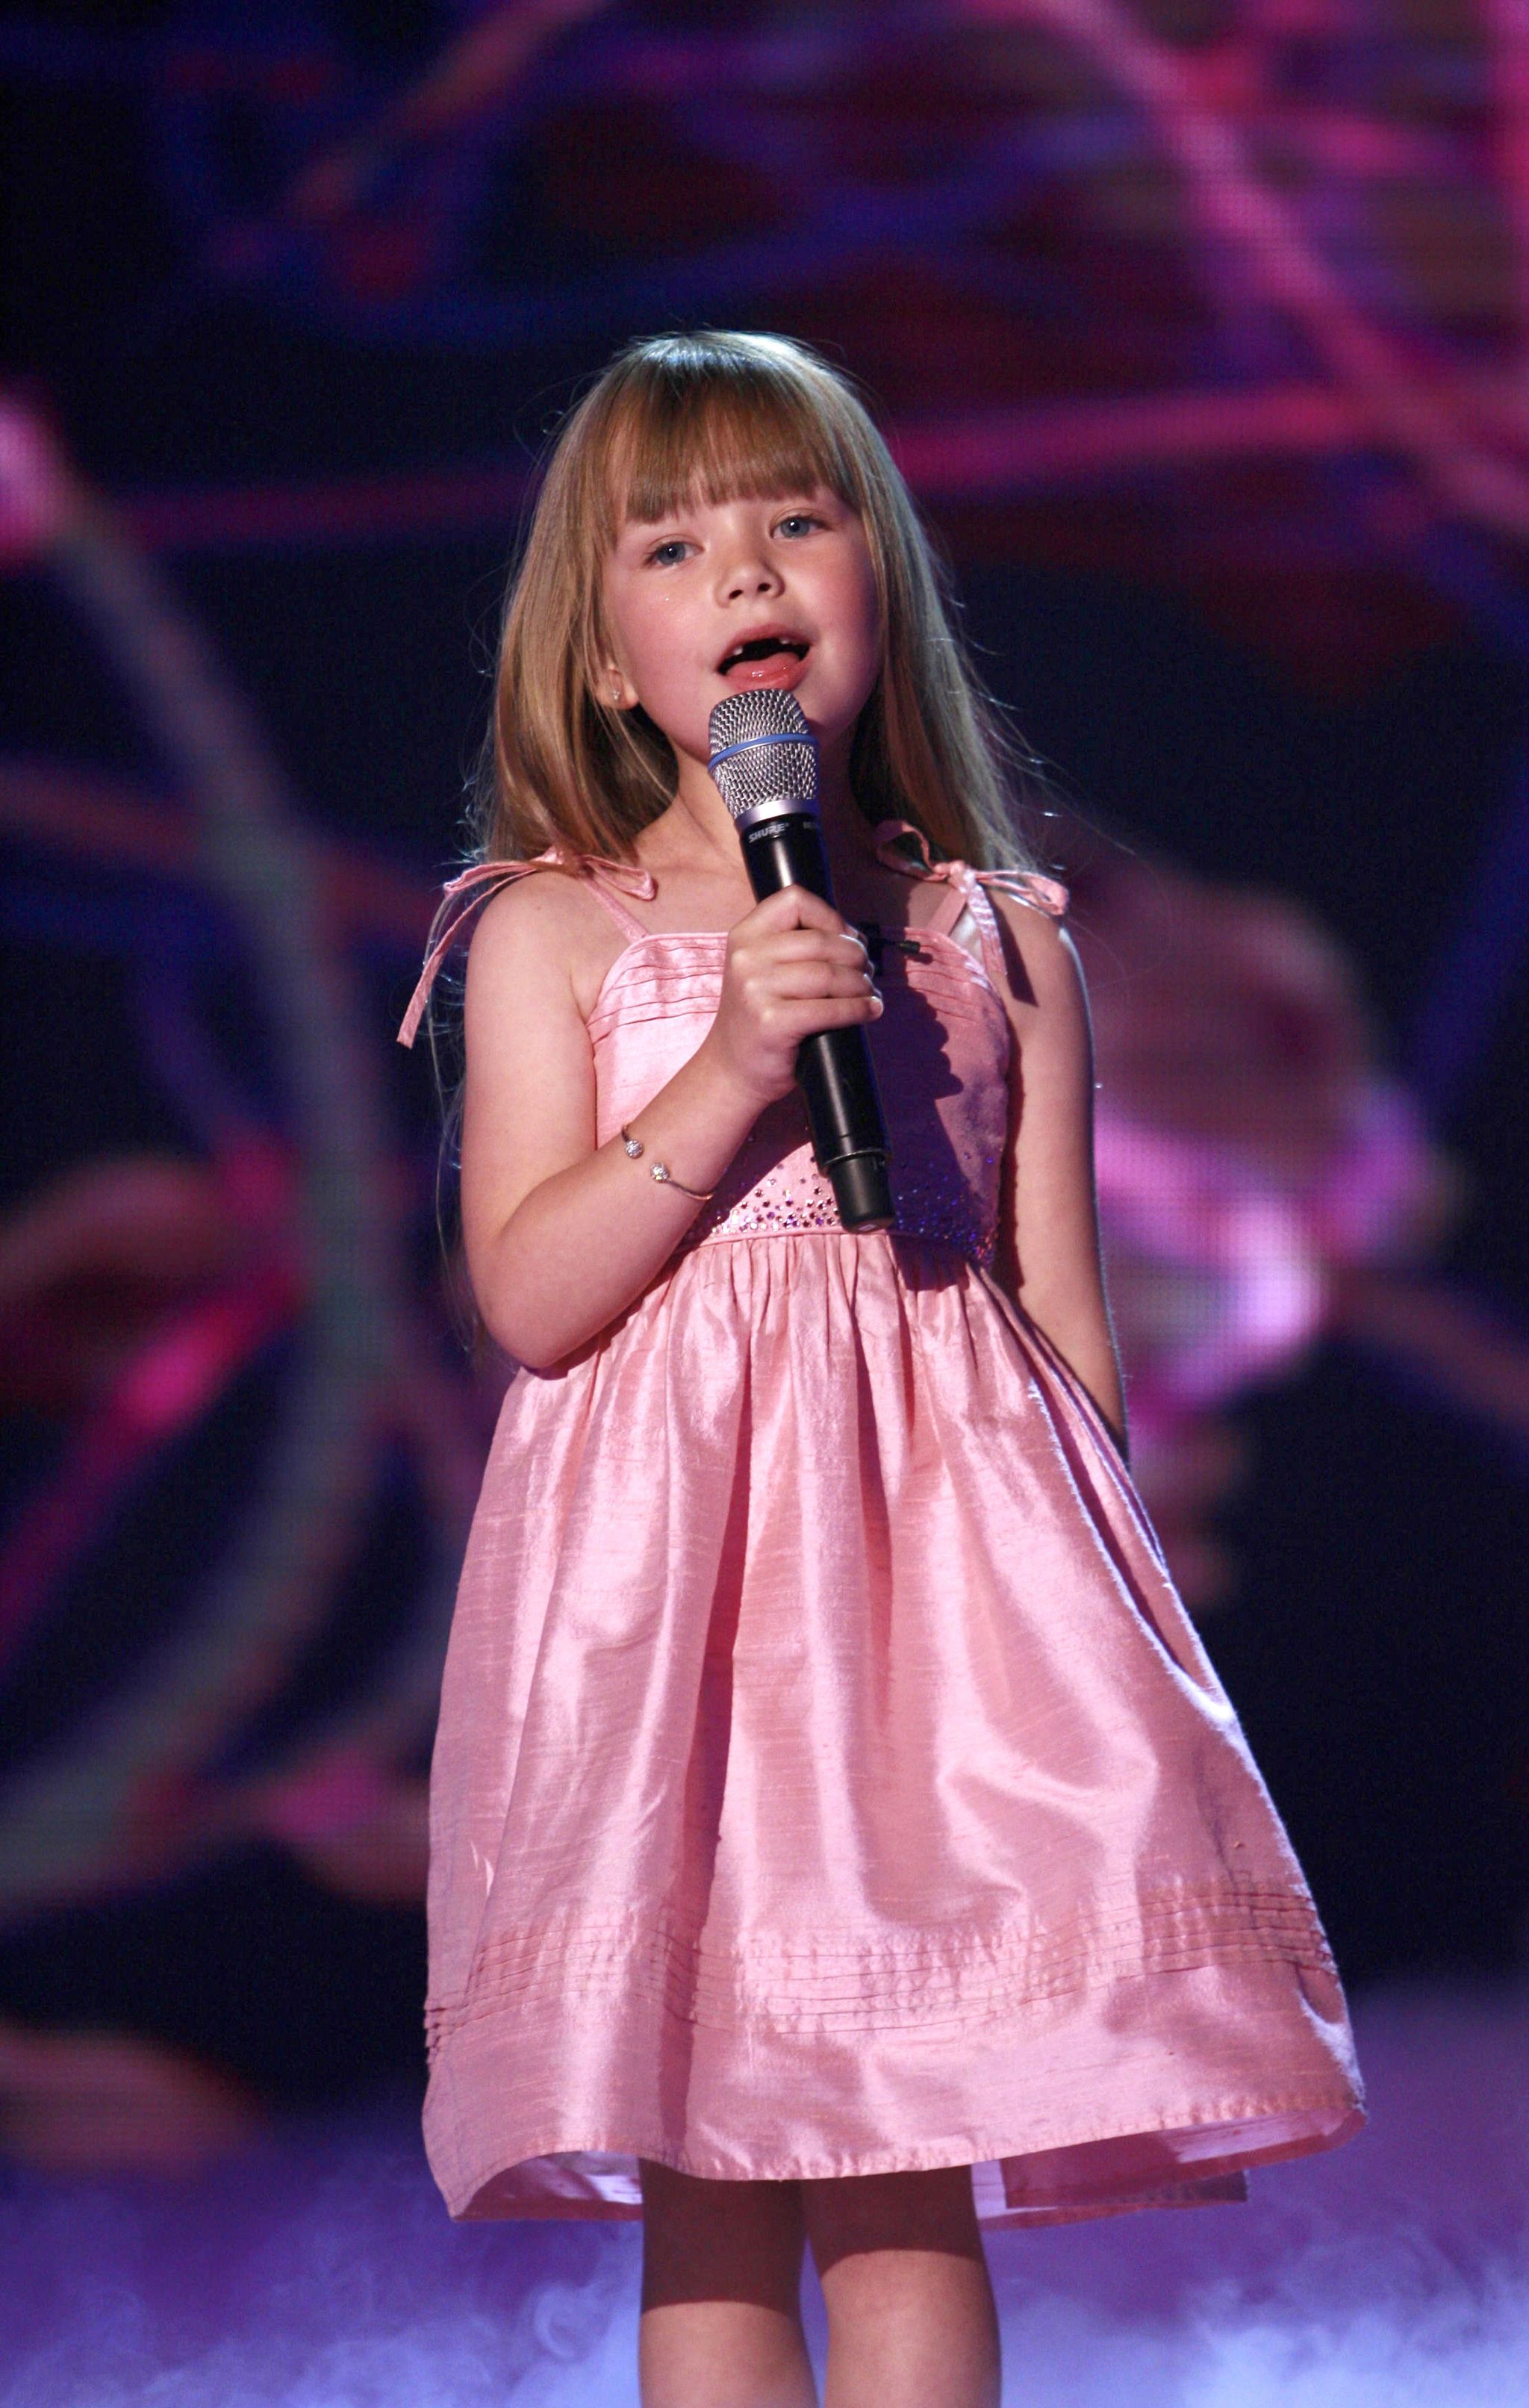 Britain's Got Talent's Connie Talbot now from successful career to